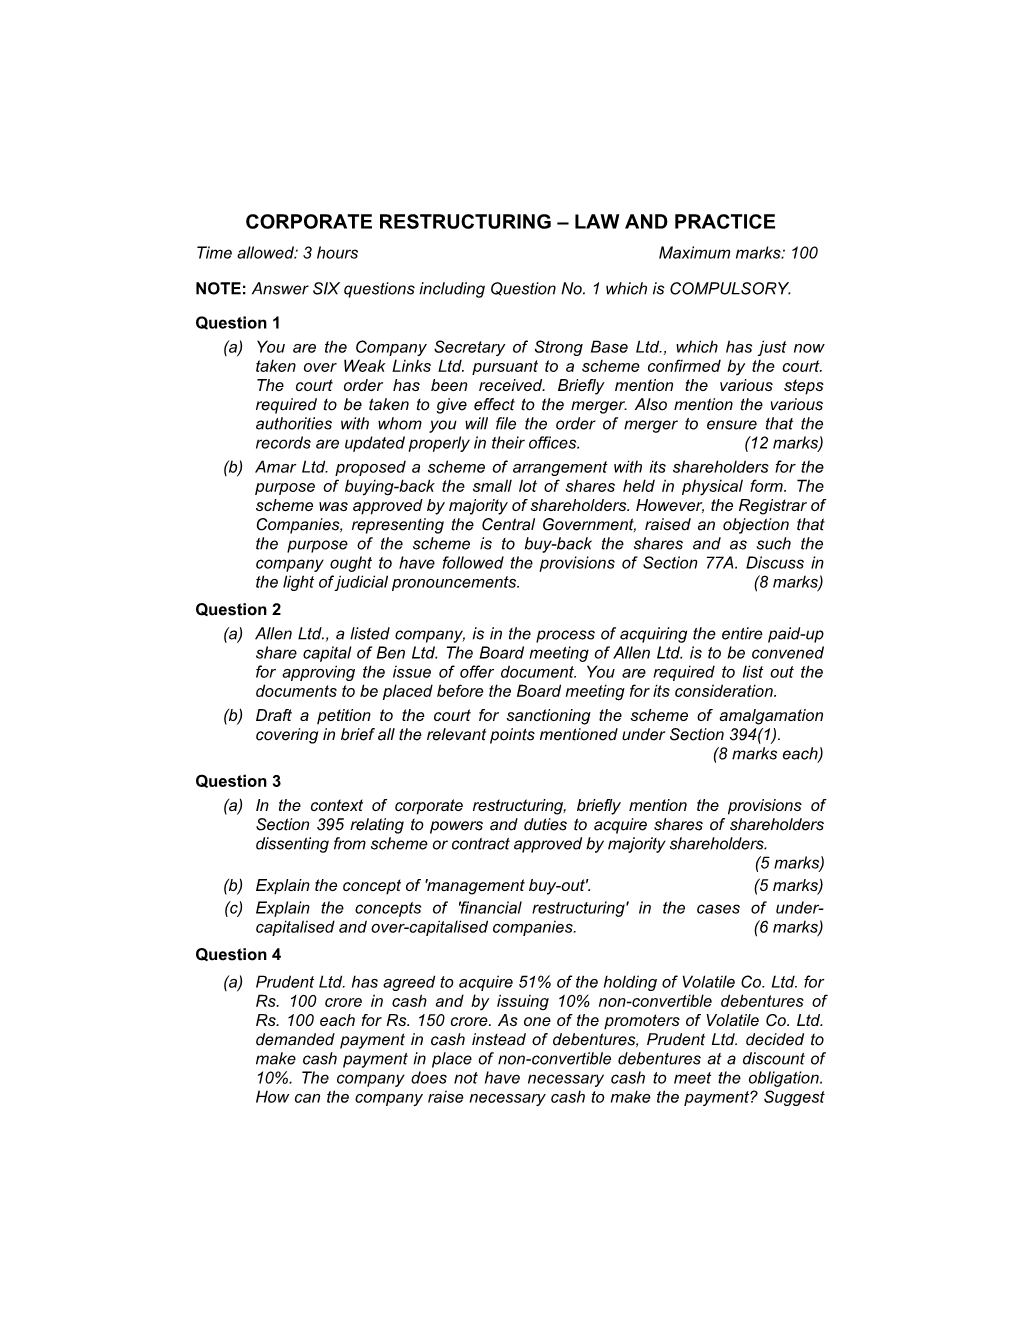 Corporate Restructuring Law and Practice